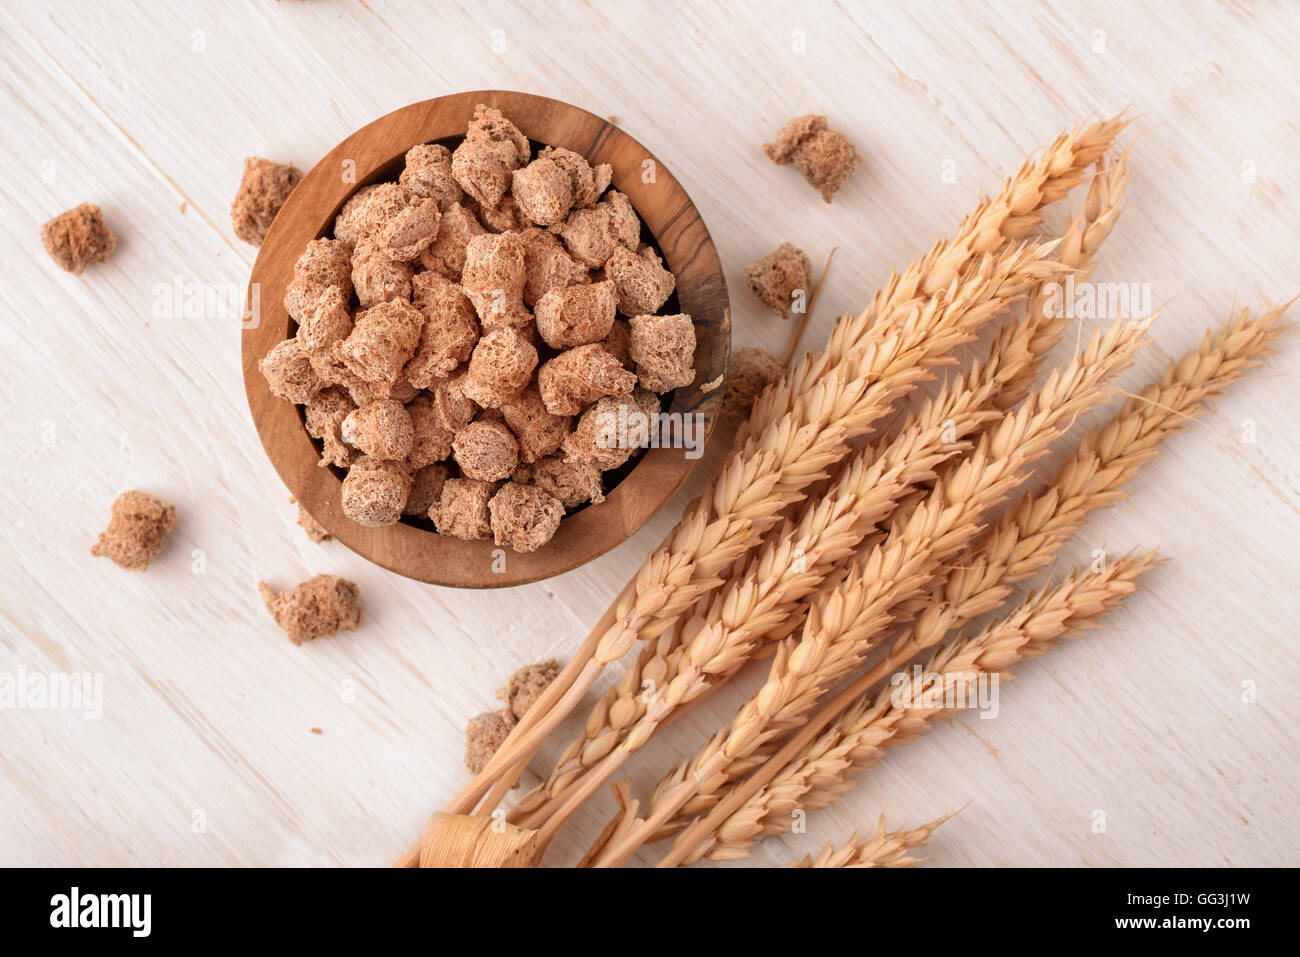 Top view of wheat bran and wheat ears Stock Photo